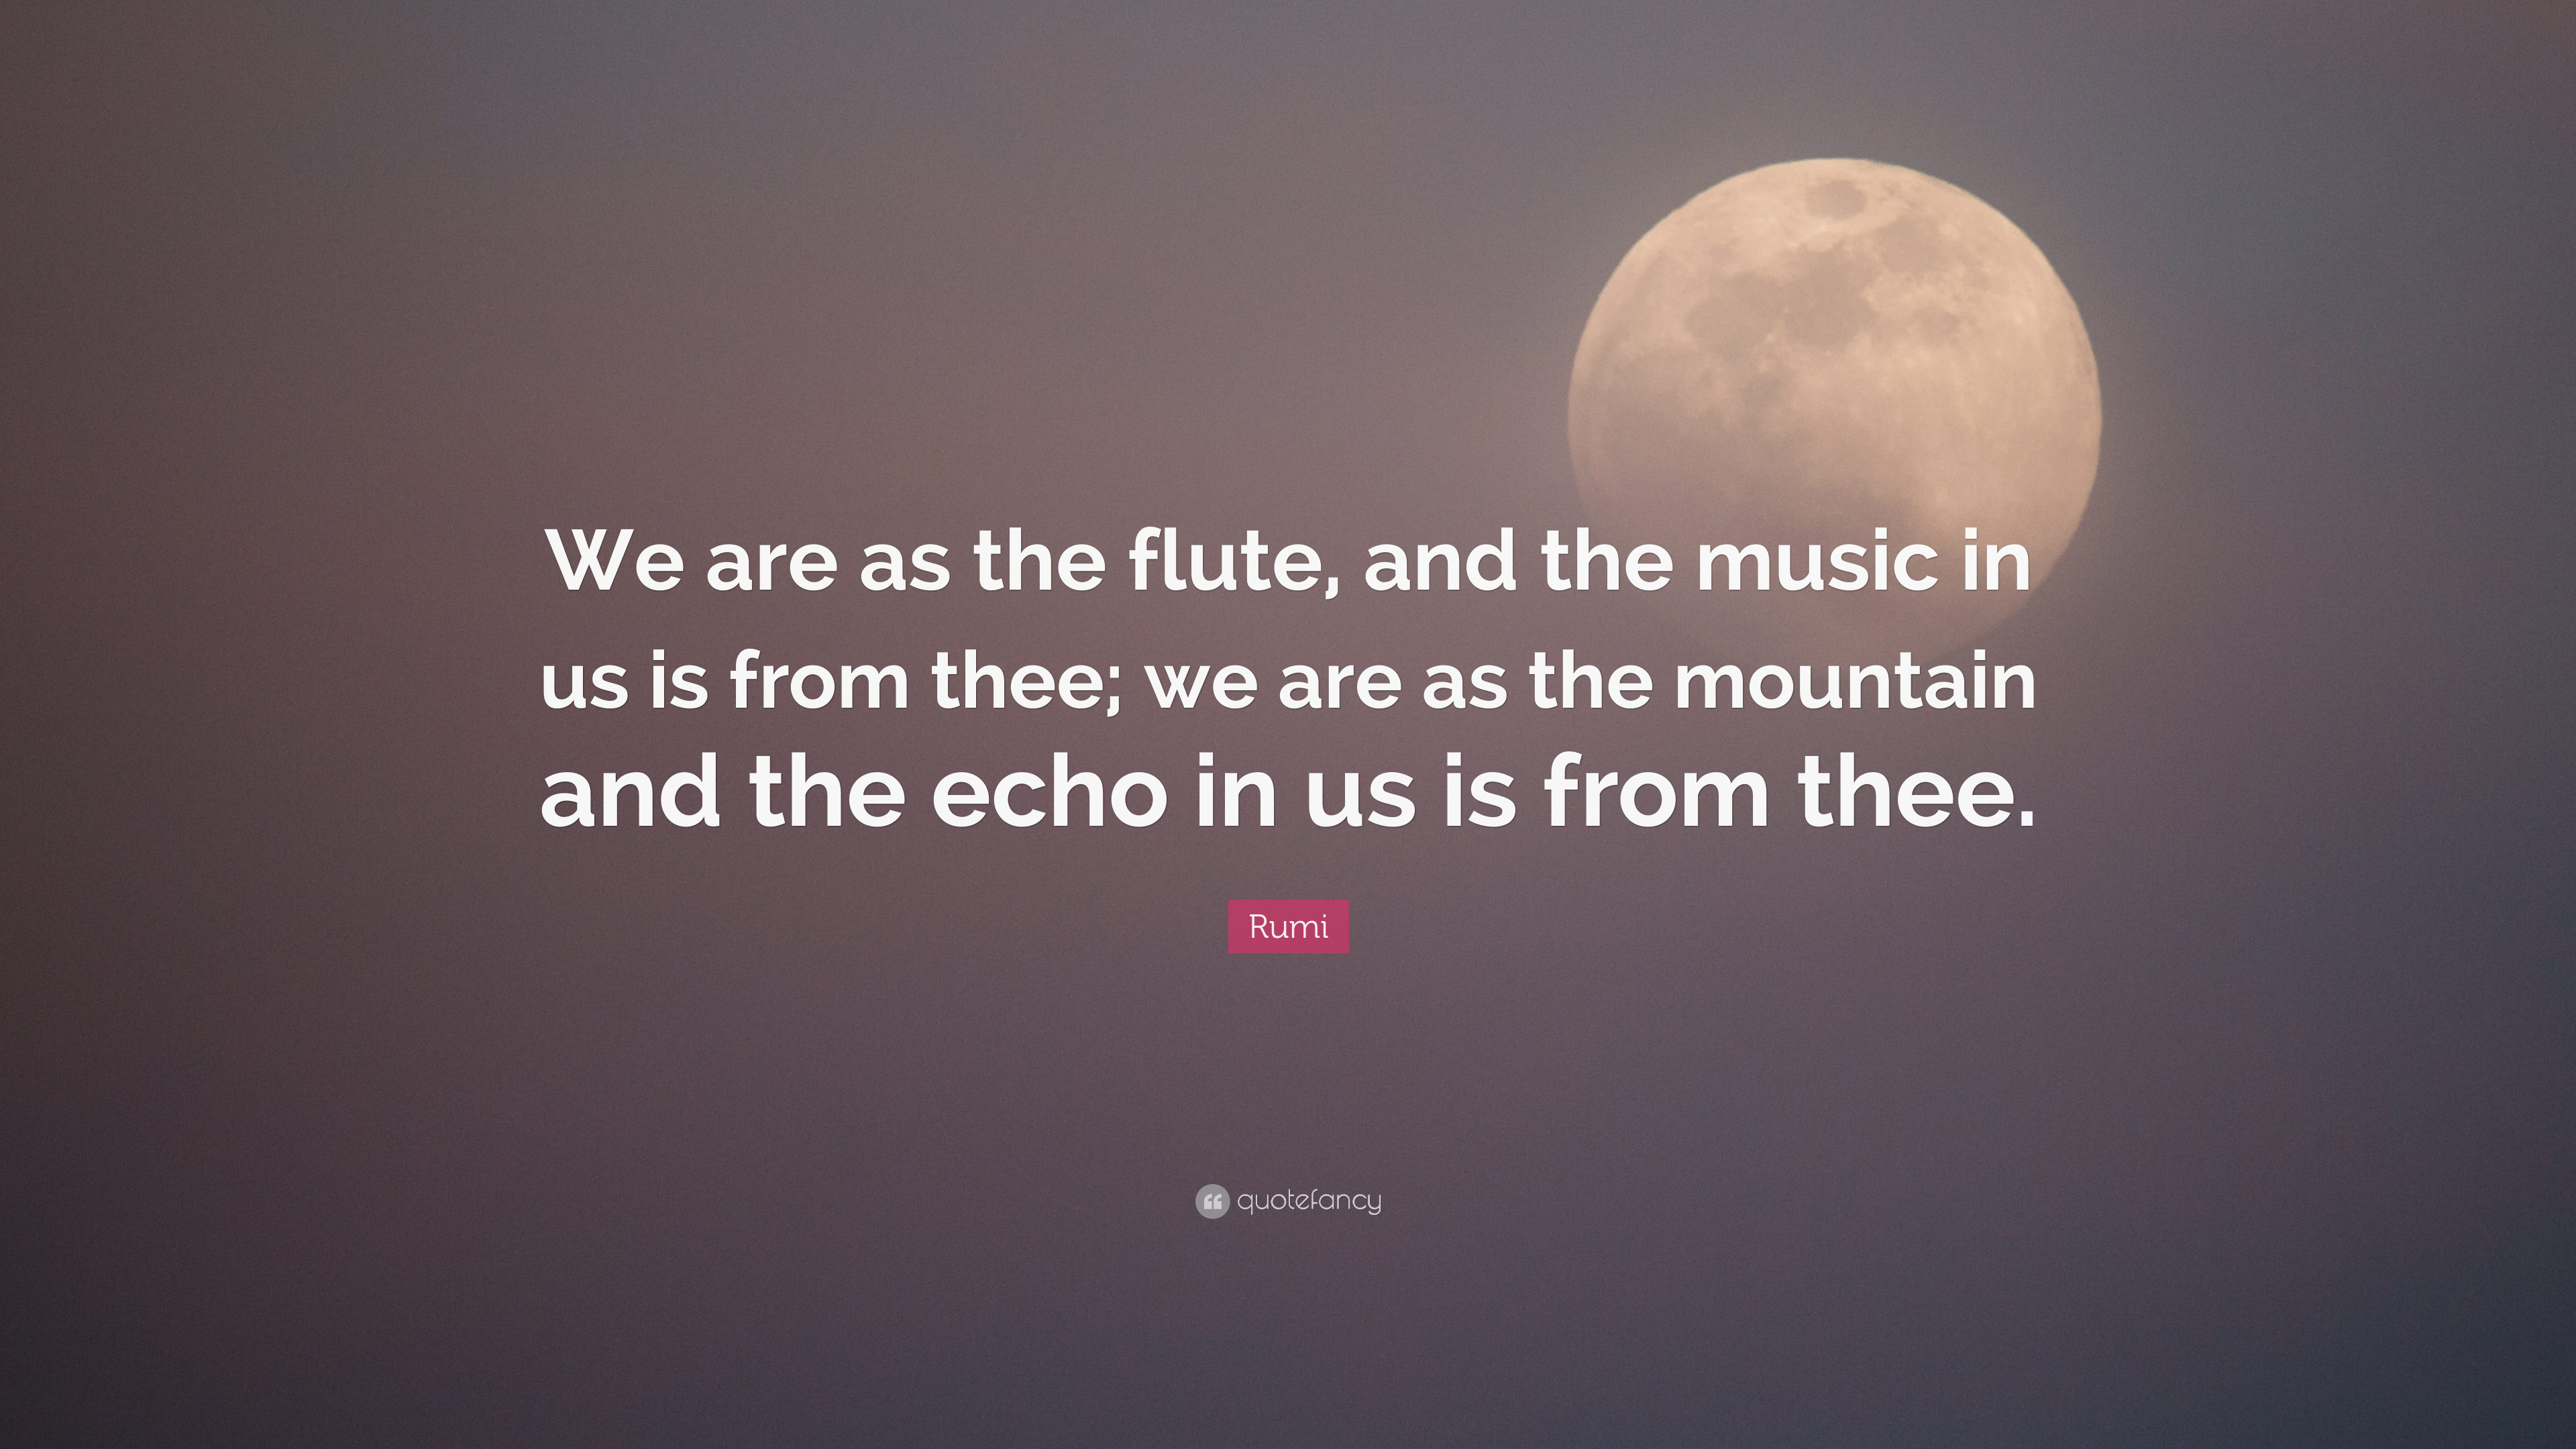 3840x2160 Rumi Quote: “We are as the flute, and the music in us is